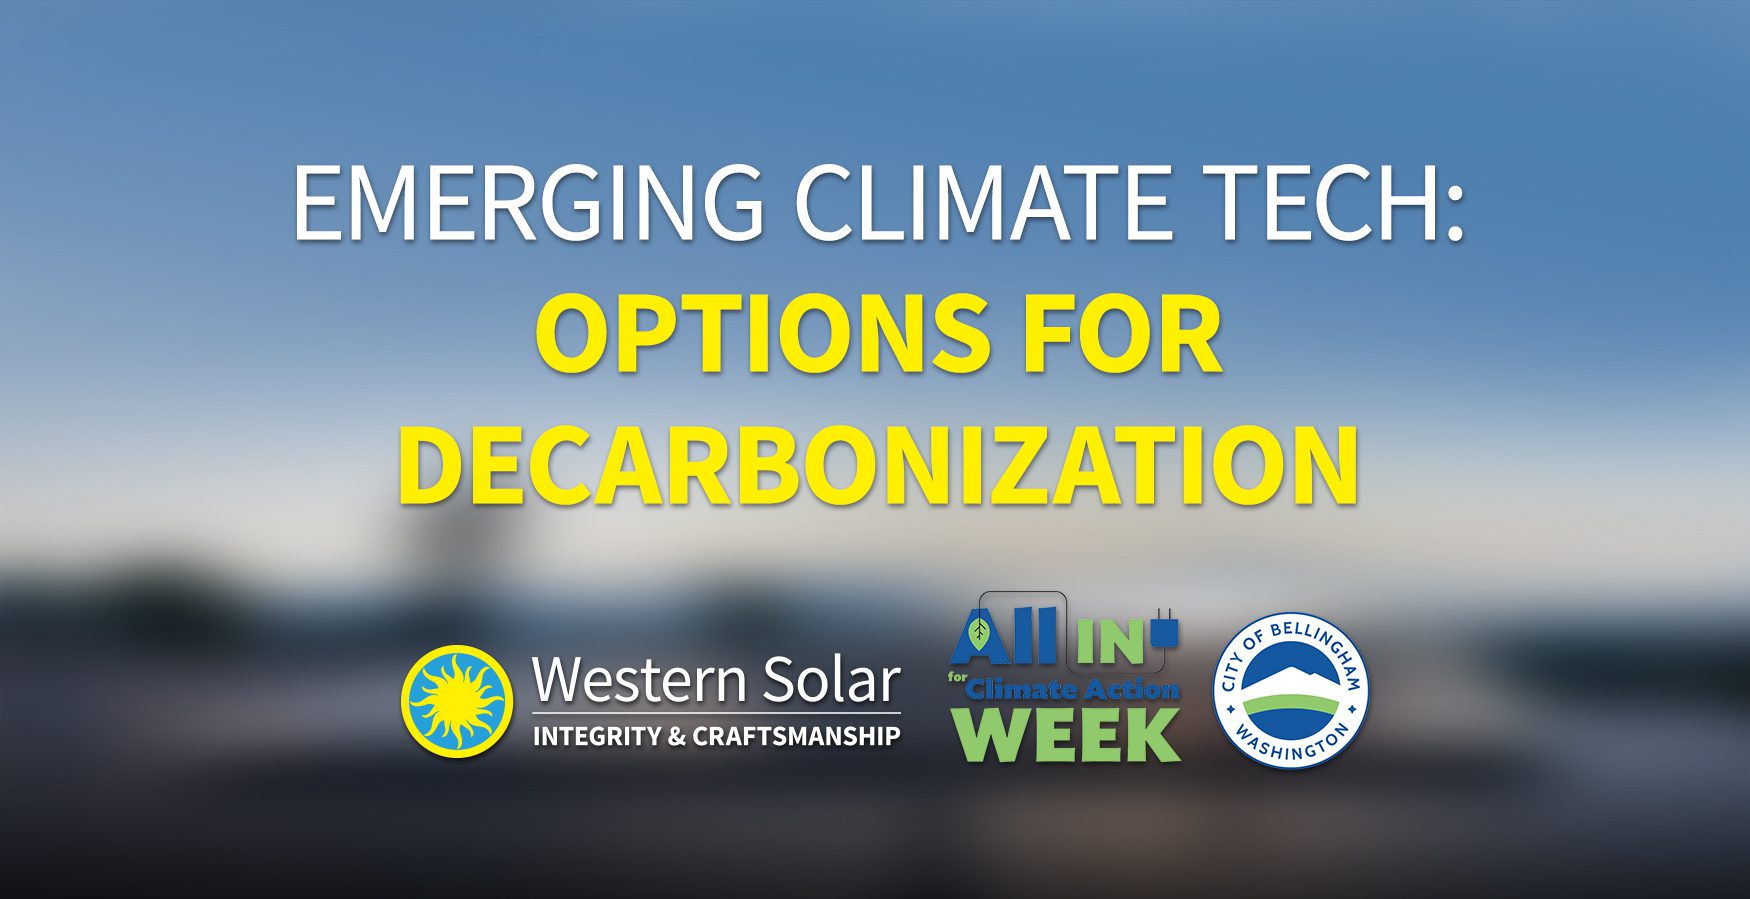 Blurred image with text reading "Emerging Climate Tech: Options for Decarbonization". Western Solar and Climate Action Week logos are underneath the text.